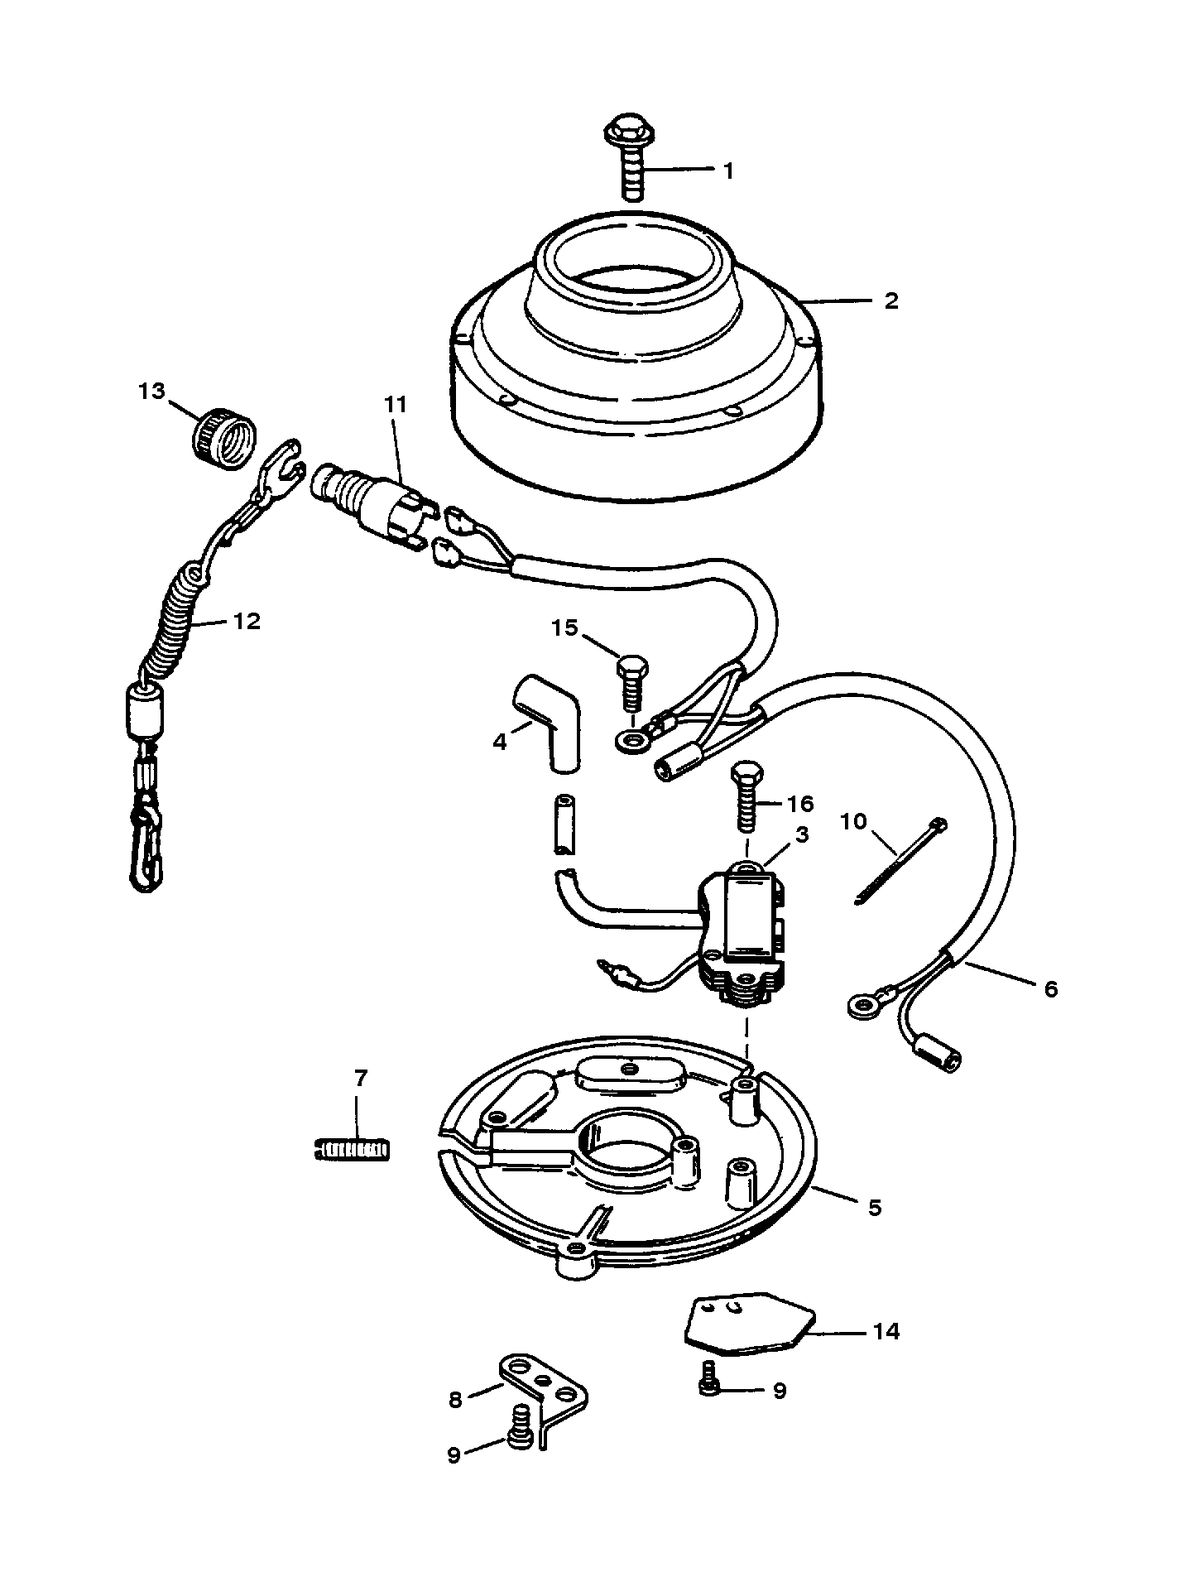 SEARS 5 H.P (OUTBOARD MOTOR) IGNITION SYSTEM